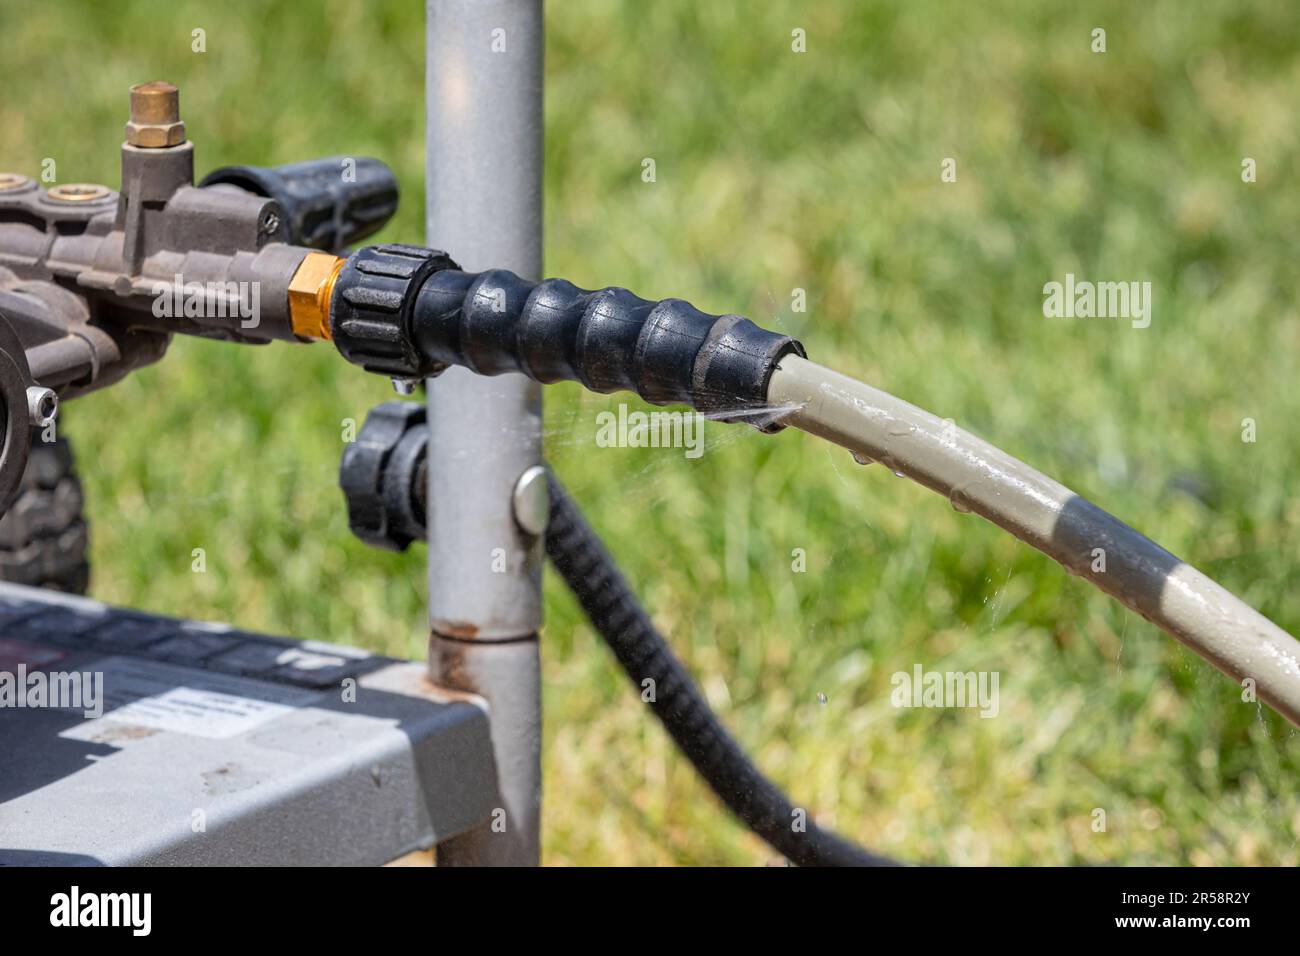 Pressure washer leaking water from high pressure hose. Power washer repair, maintenance and service concept. Stock Photo